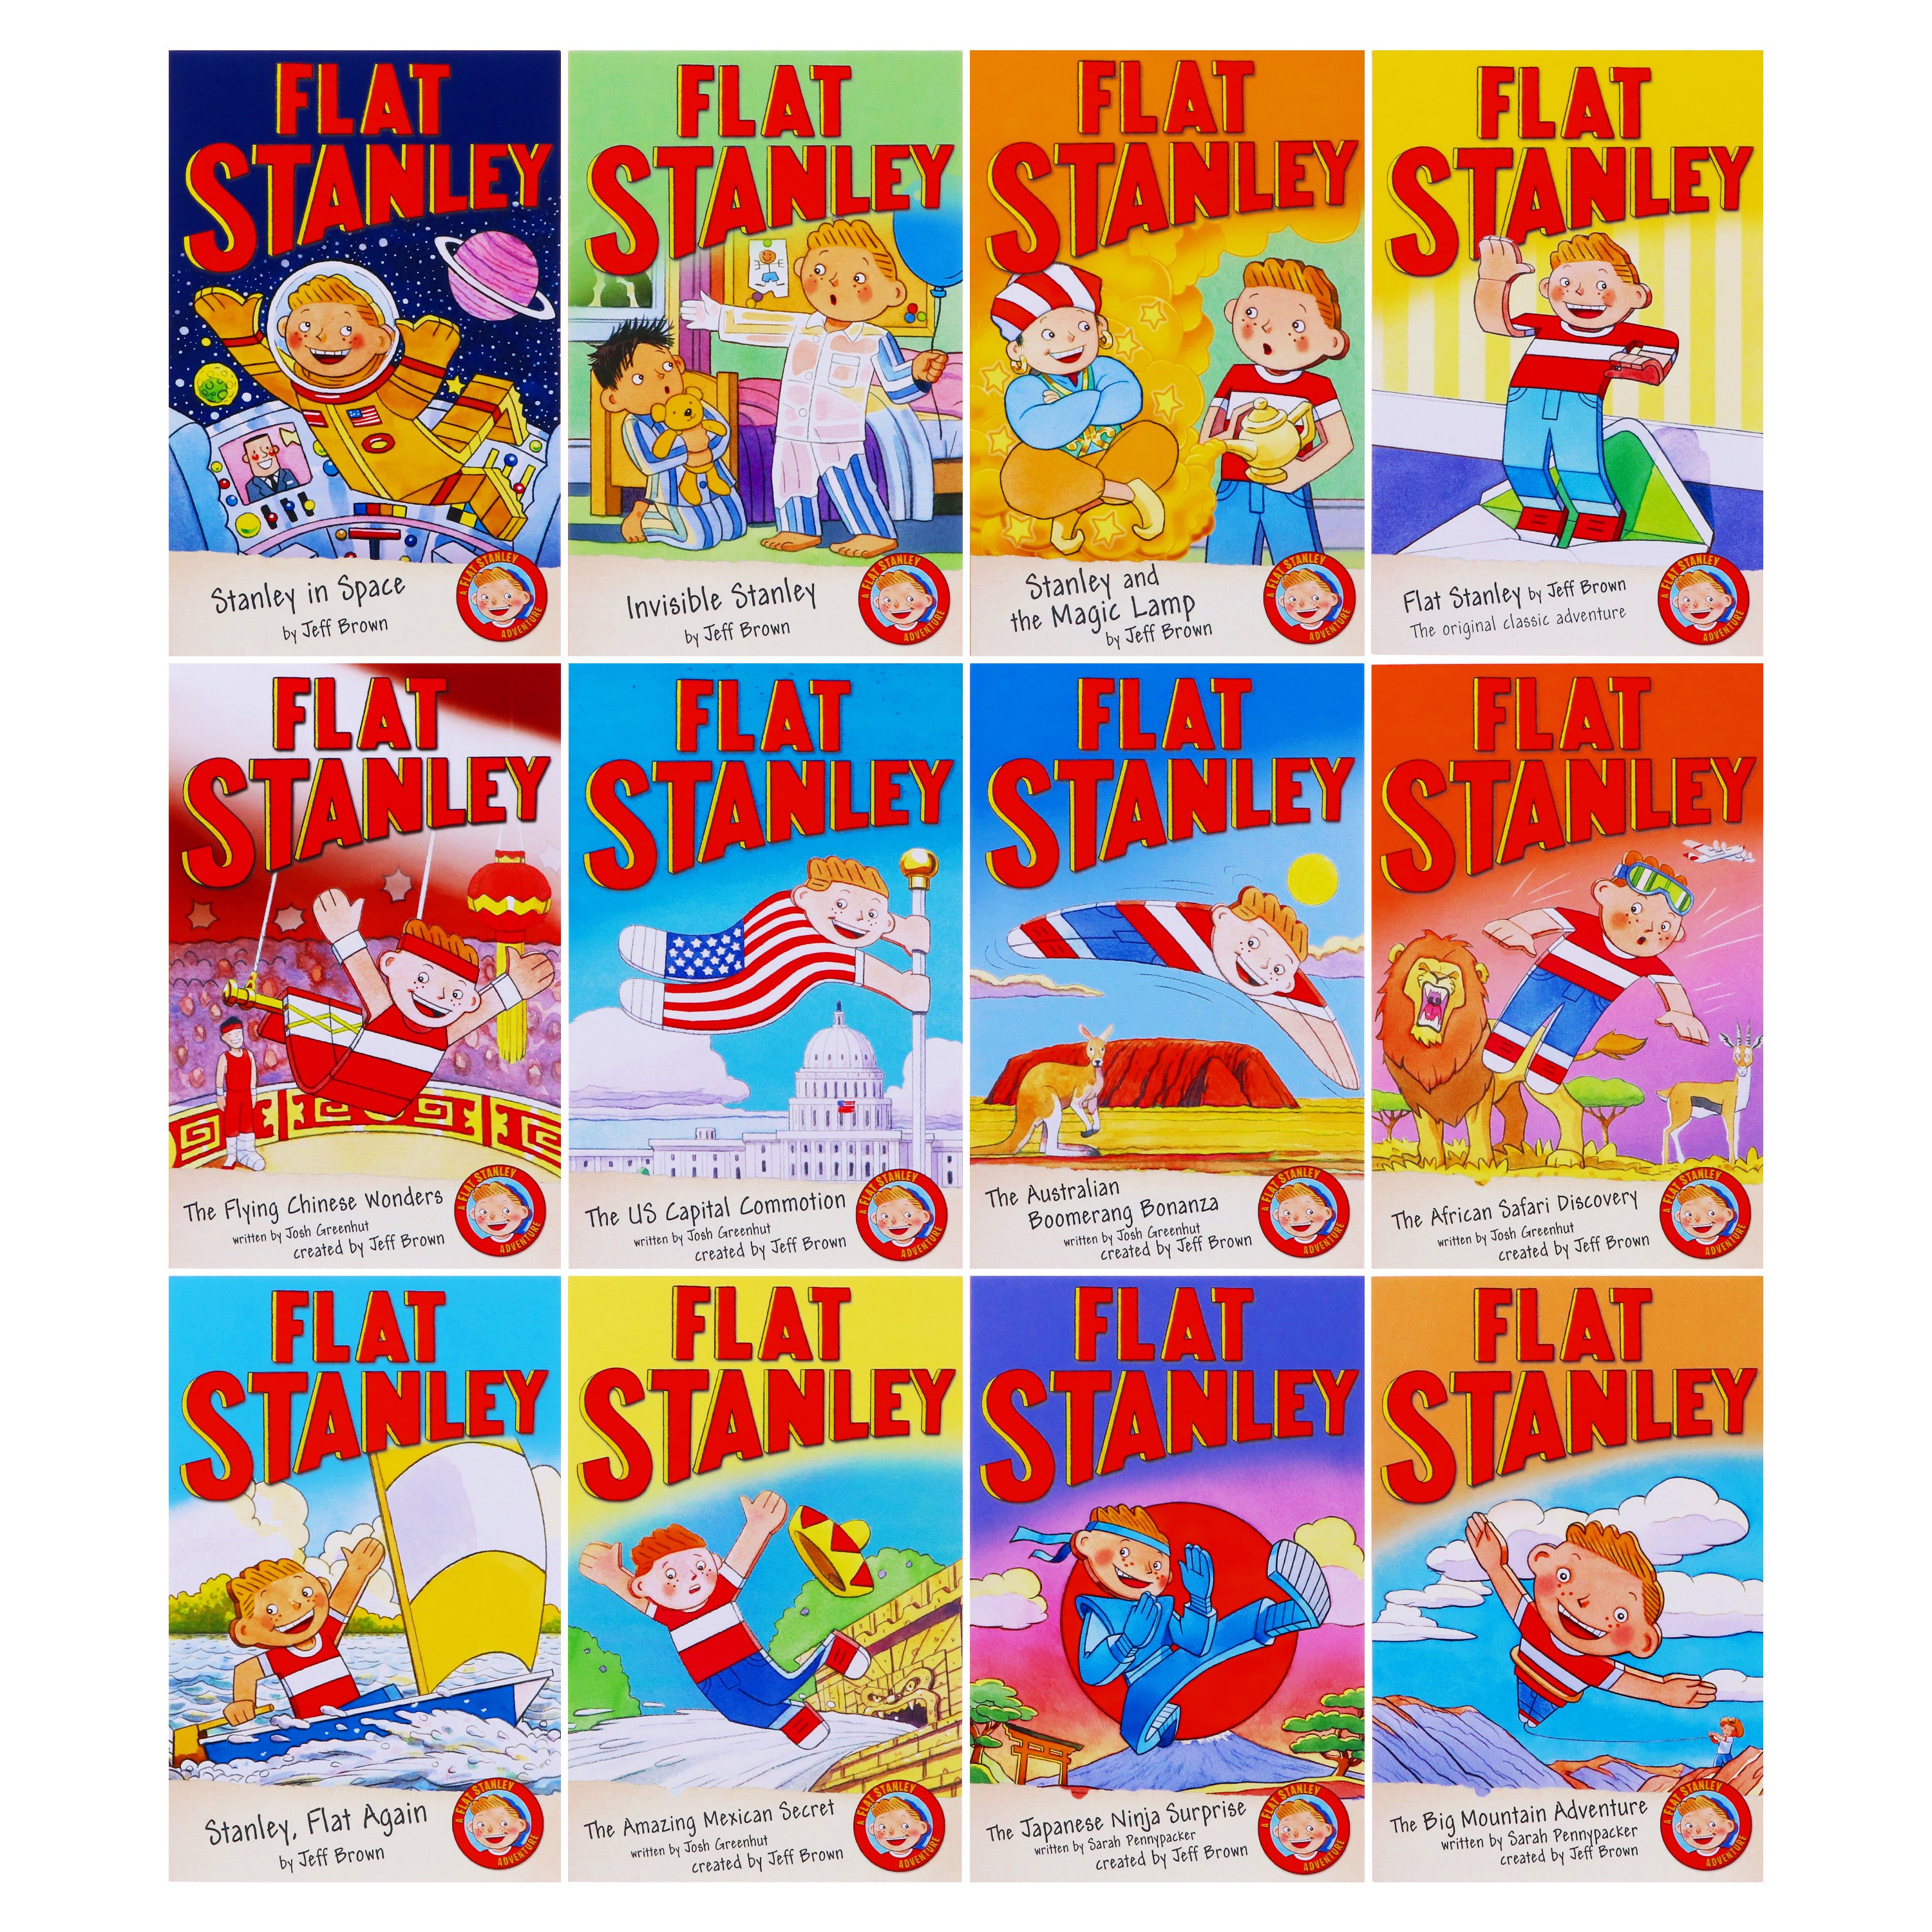 The Flat Stanley Adventure 12 Books Collection Box Set By Jeff Brown - Children's Literature - Paperback